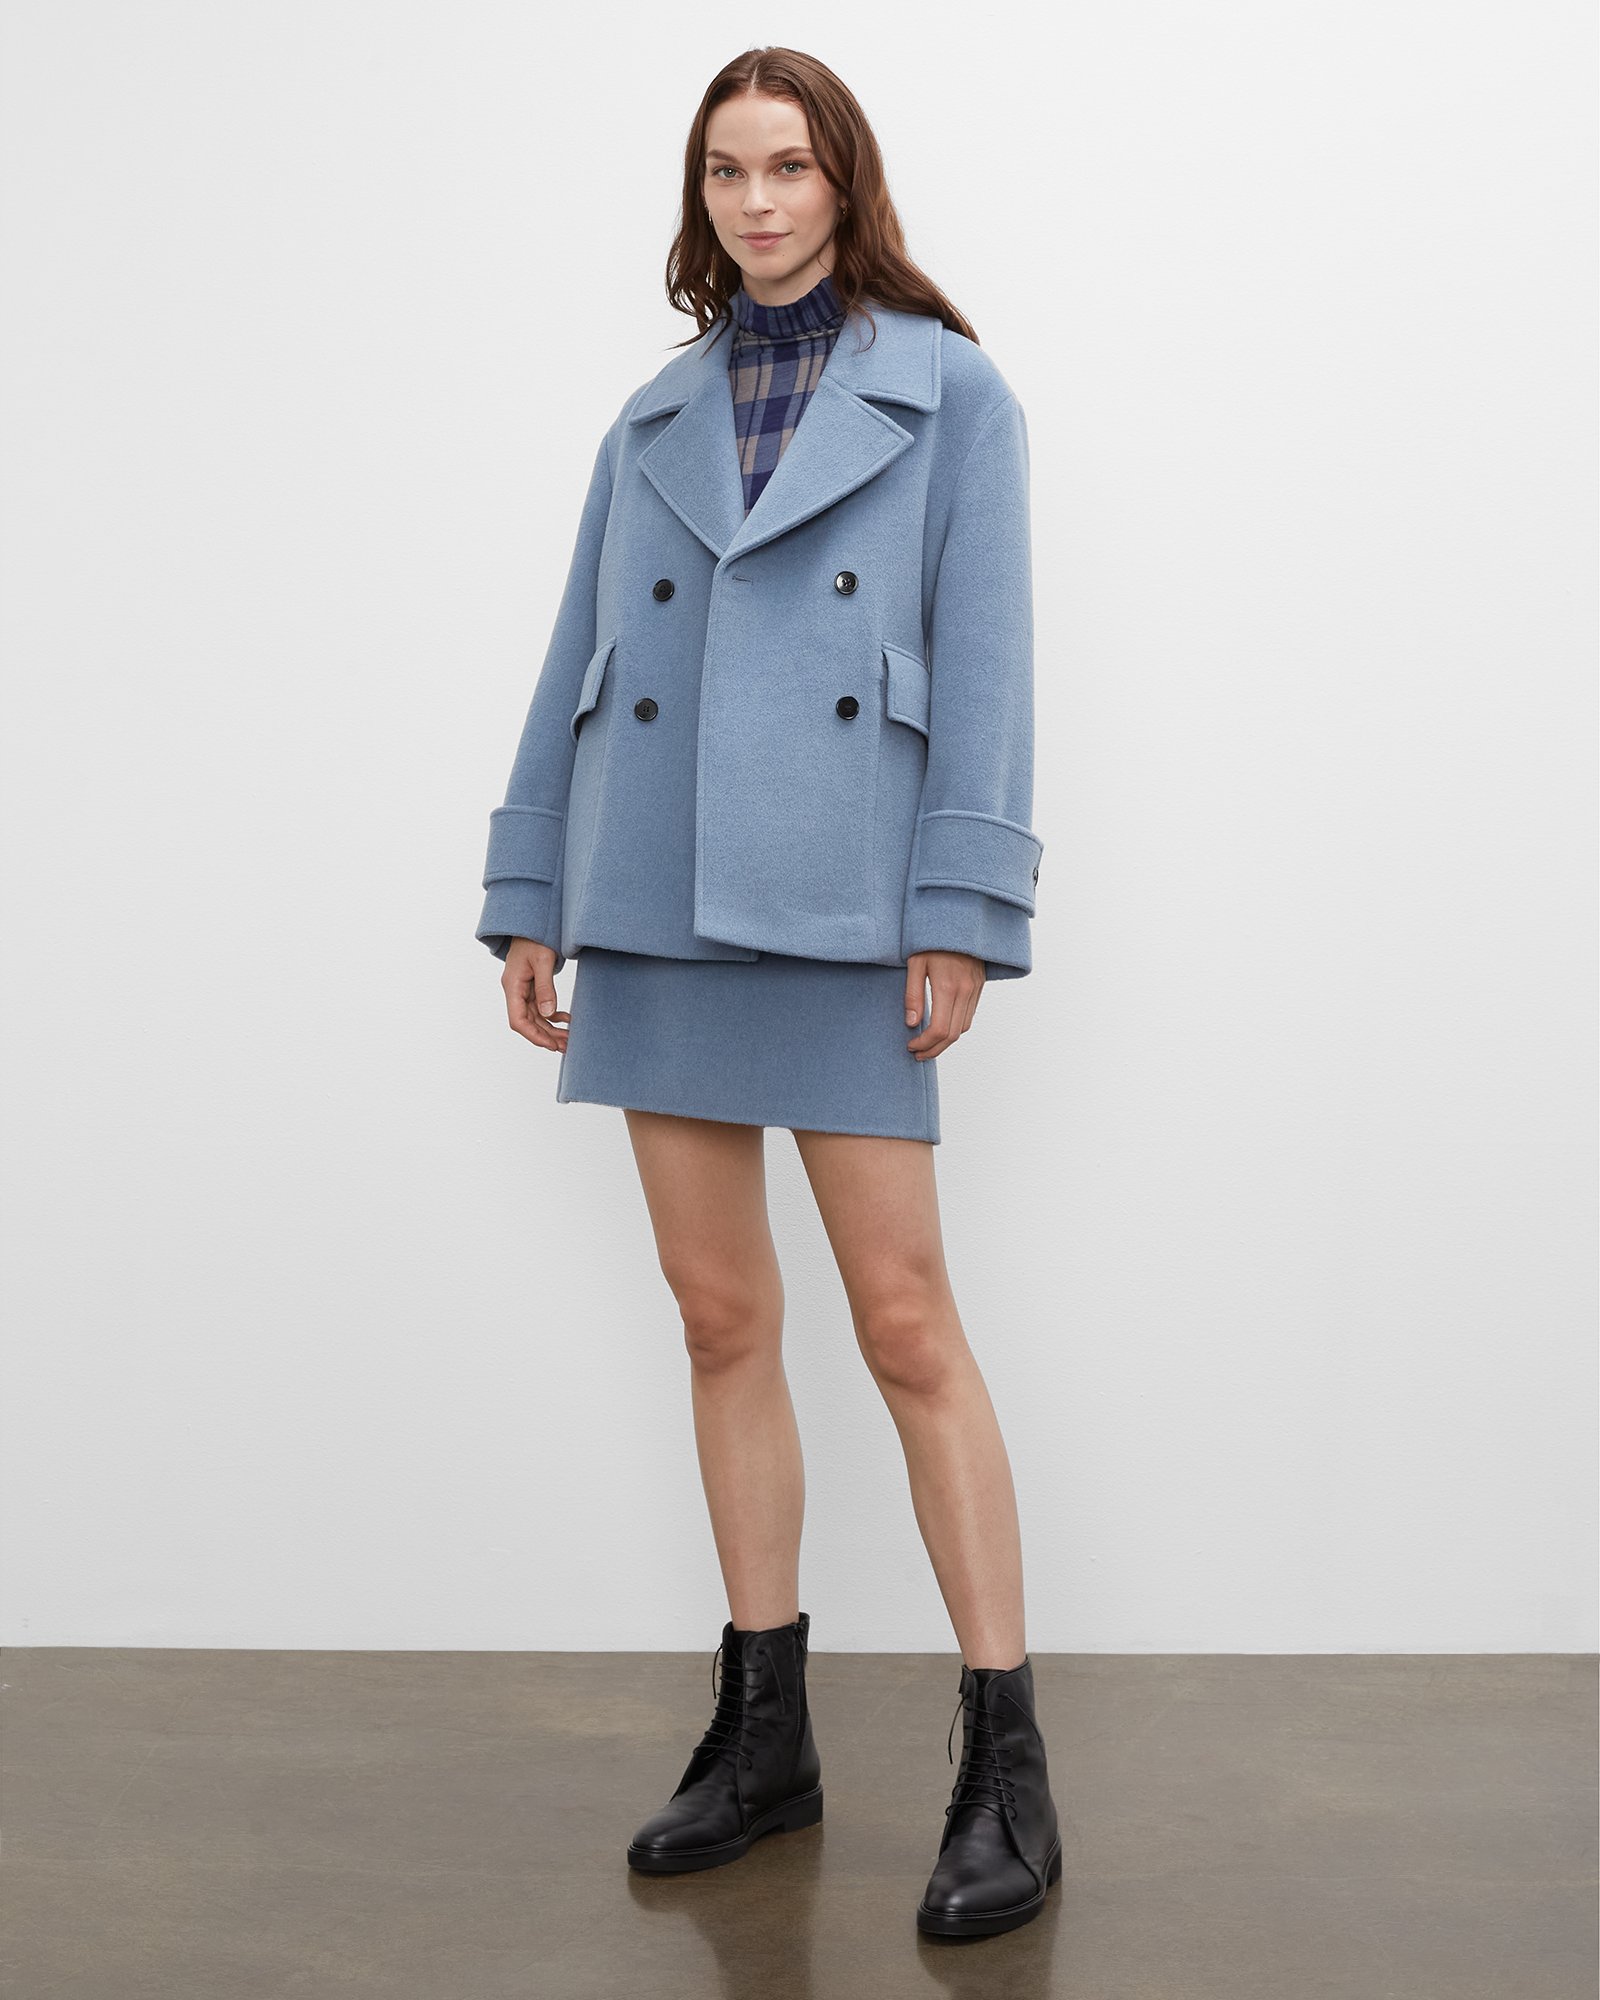 The Outerwear Event: Take 25% Off